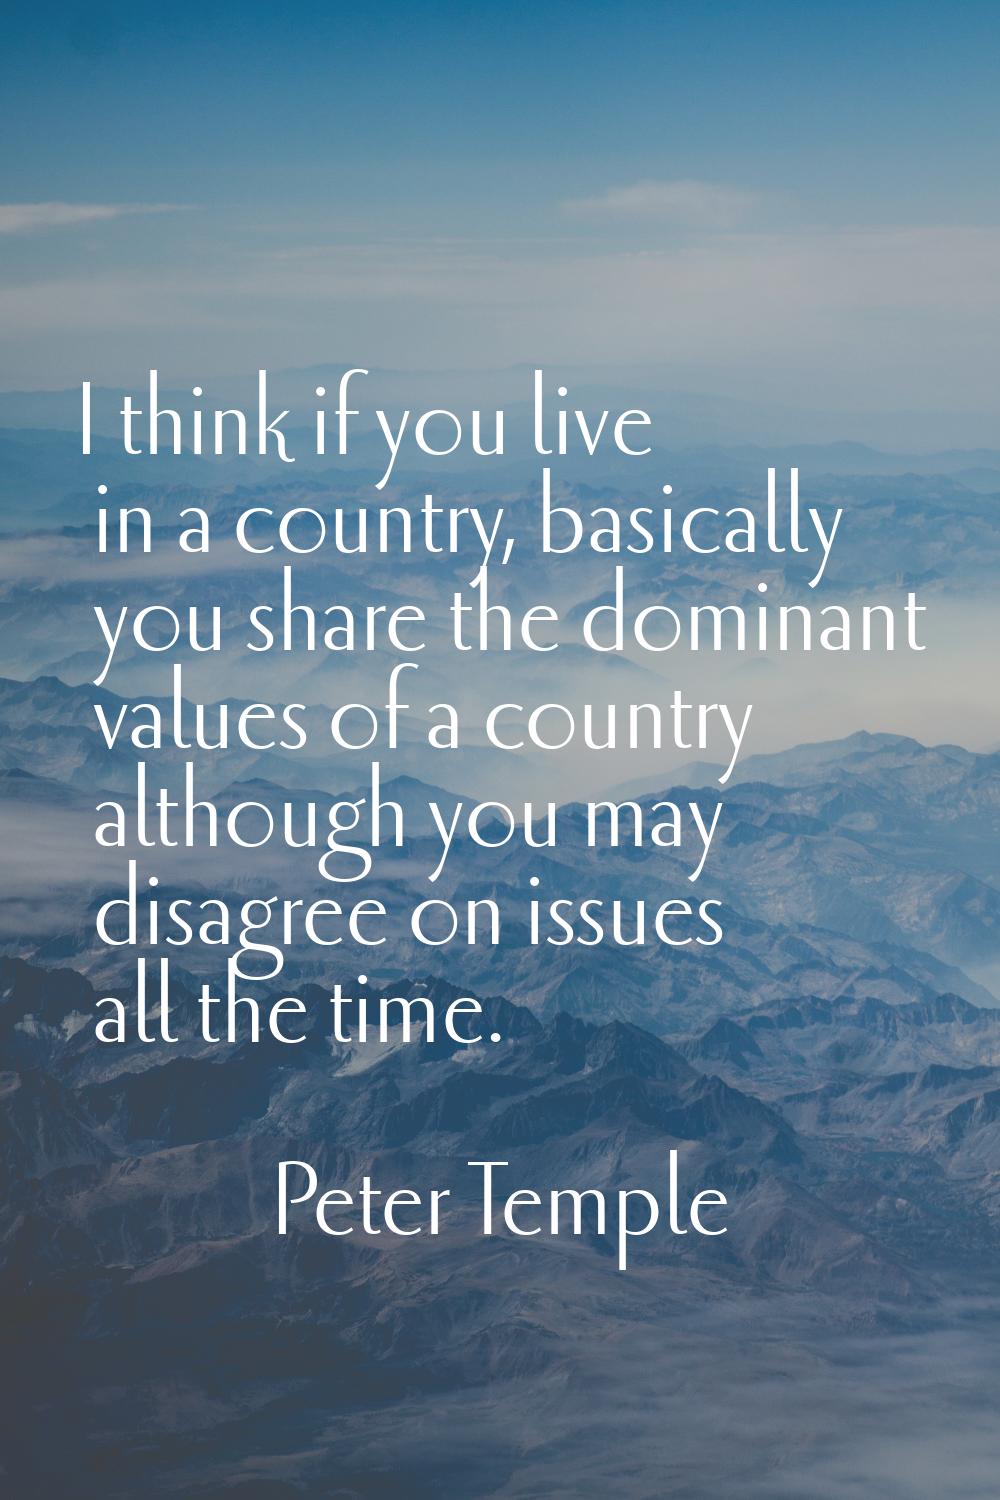 I think if you live in a country, basically you share the dominant values of a country although you